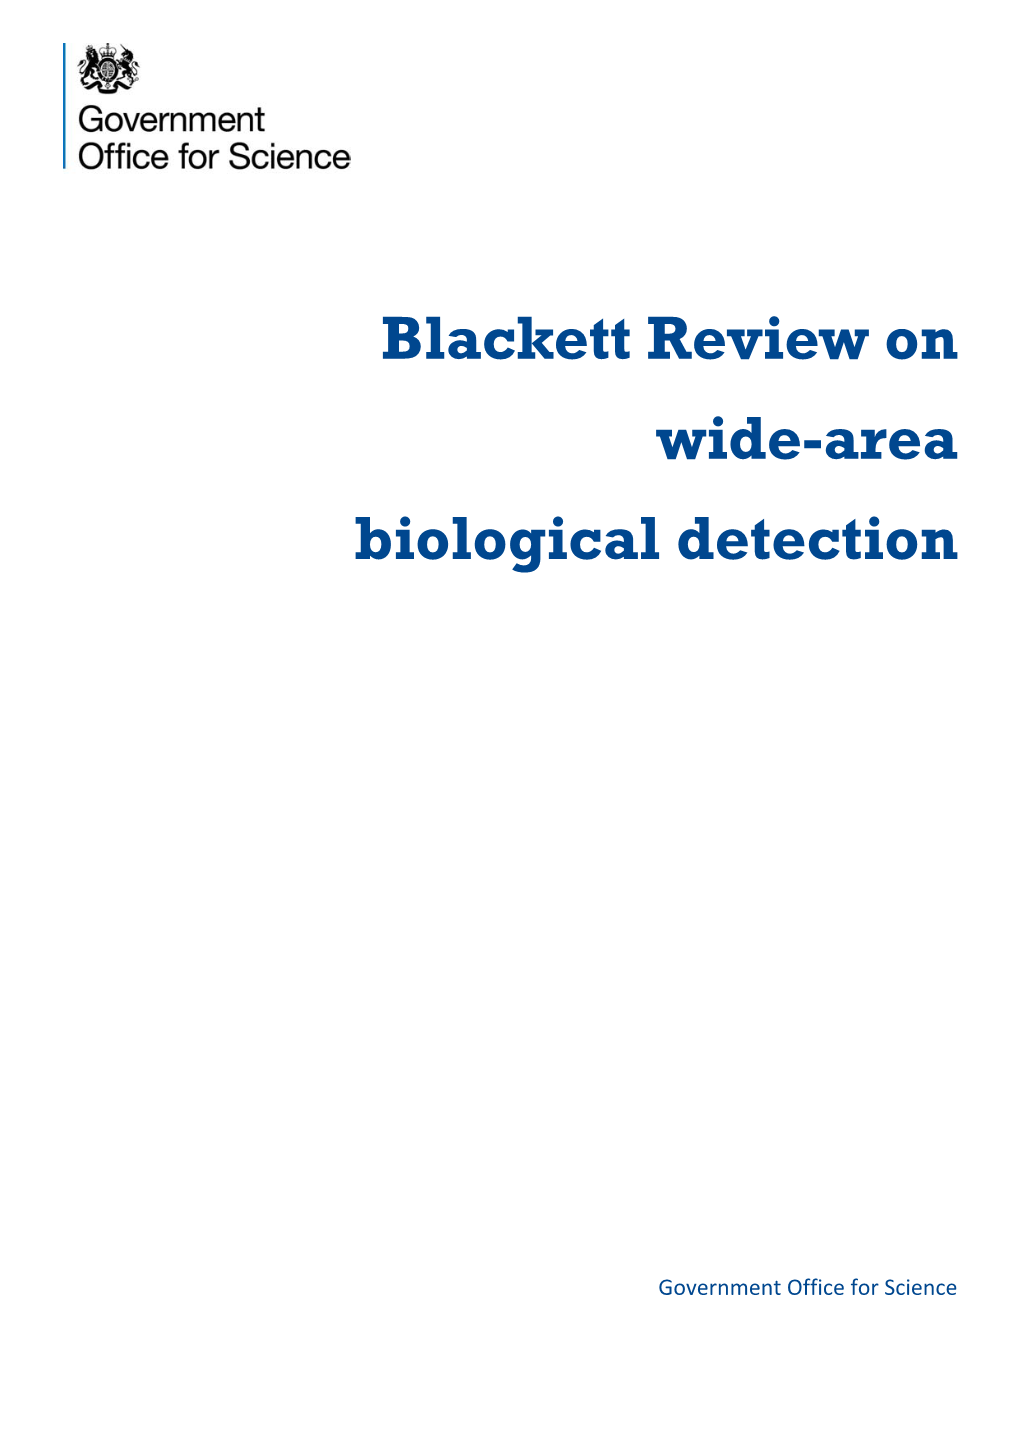 Blackett Review on Wide-Area Biological Detection